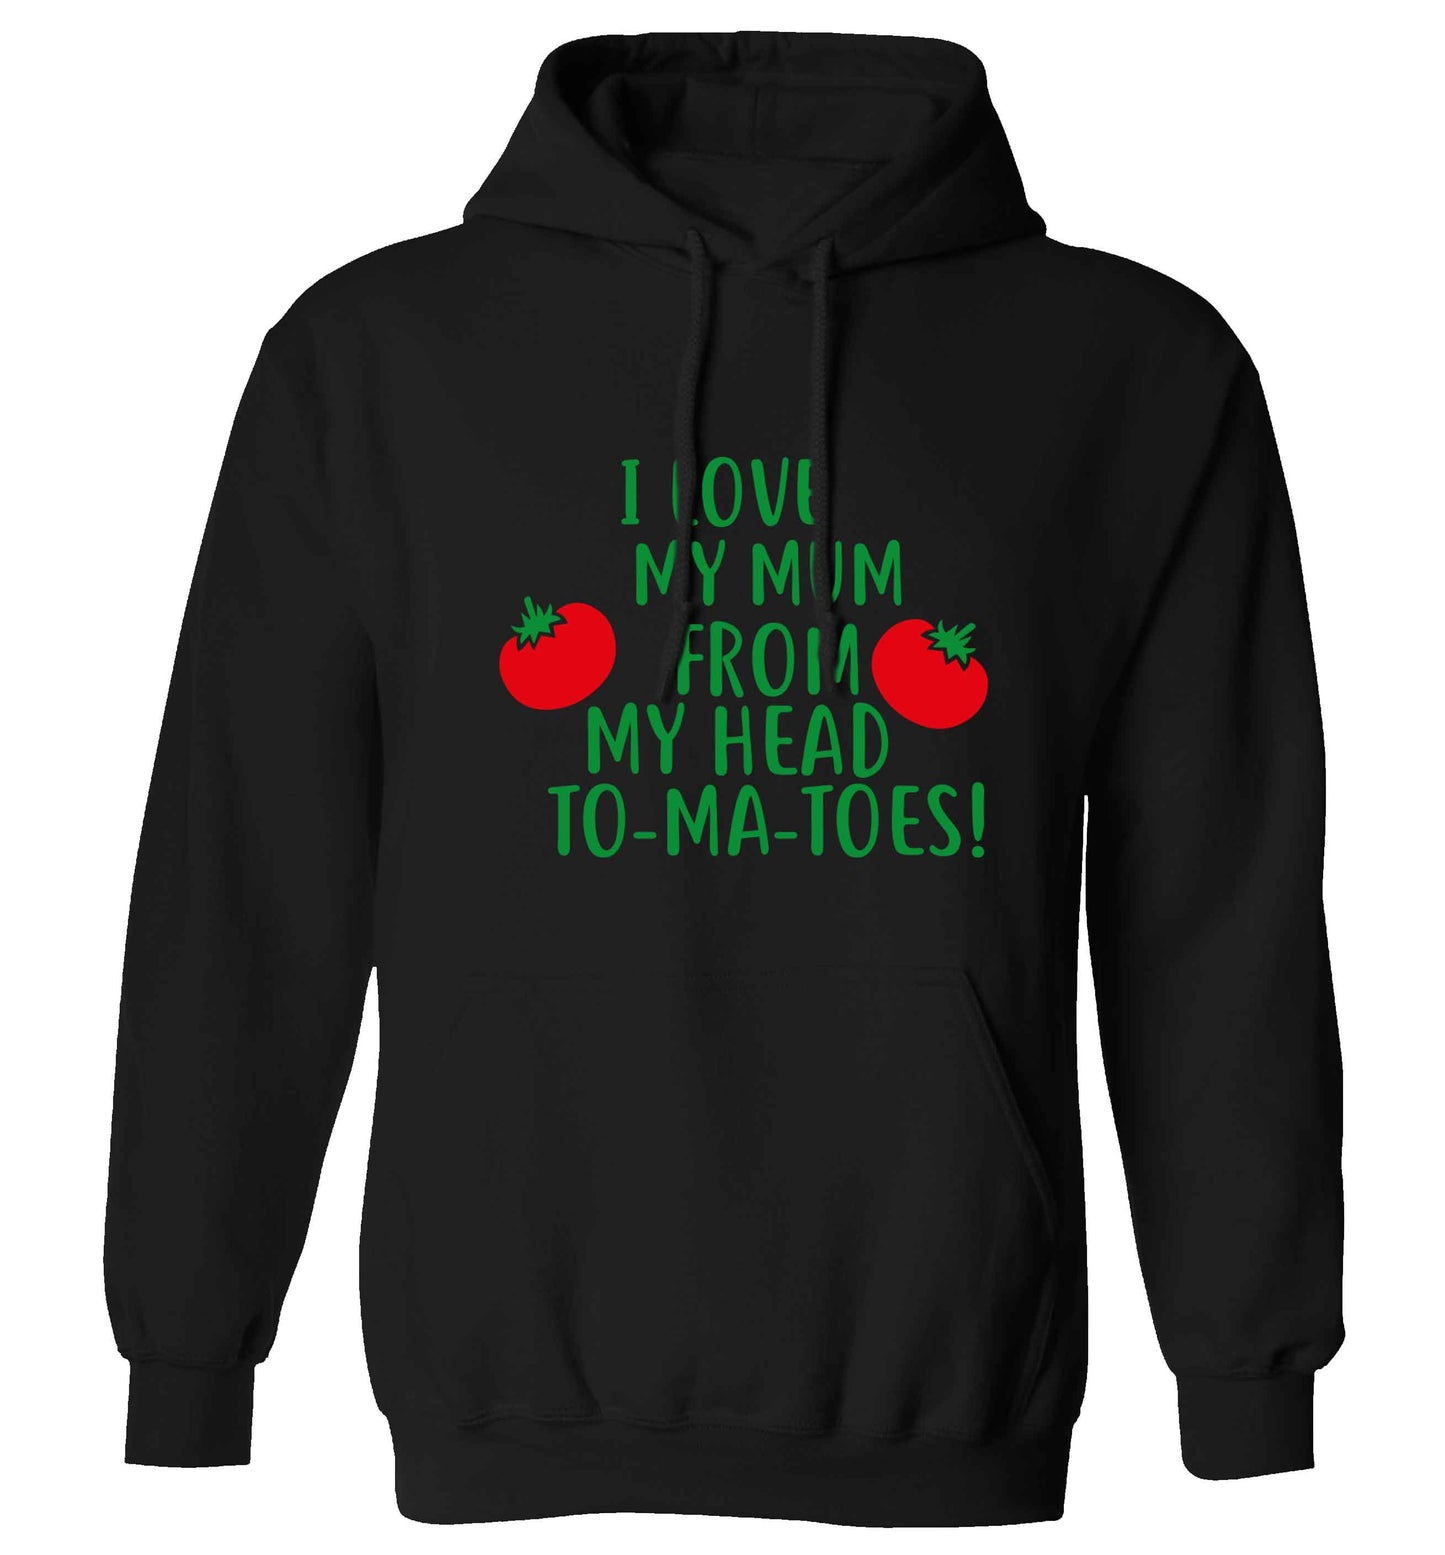 I love my mum from my head to-my-toes! adults unisex black hoodie 2XL